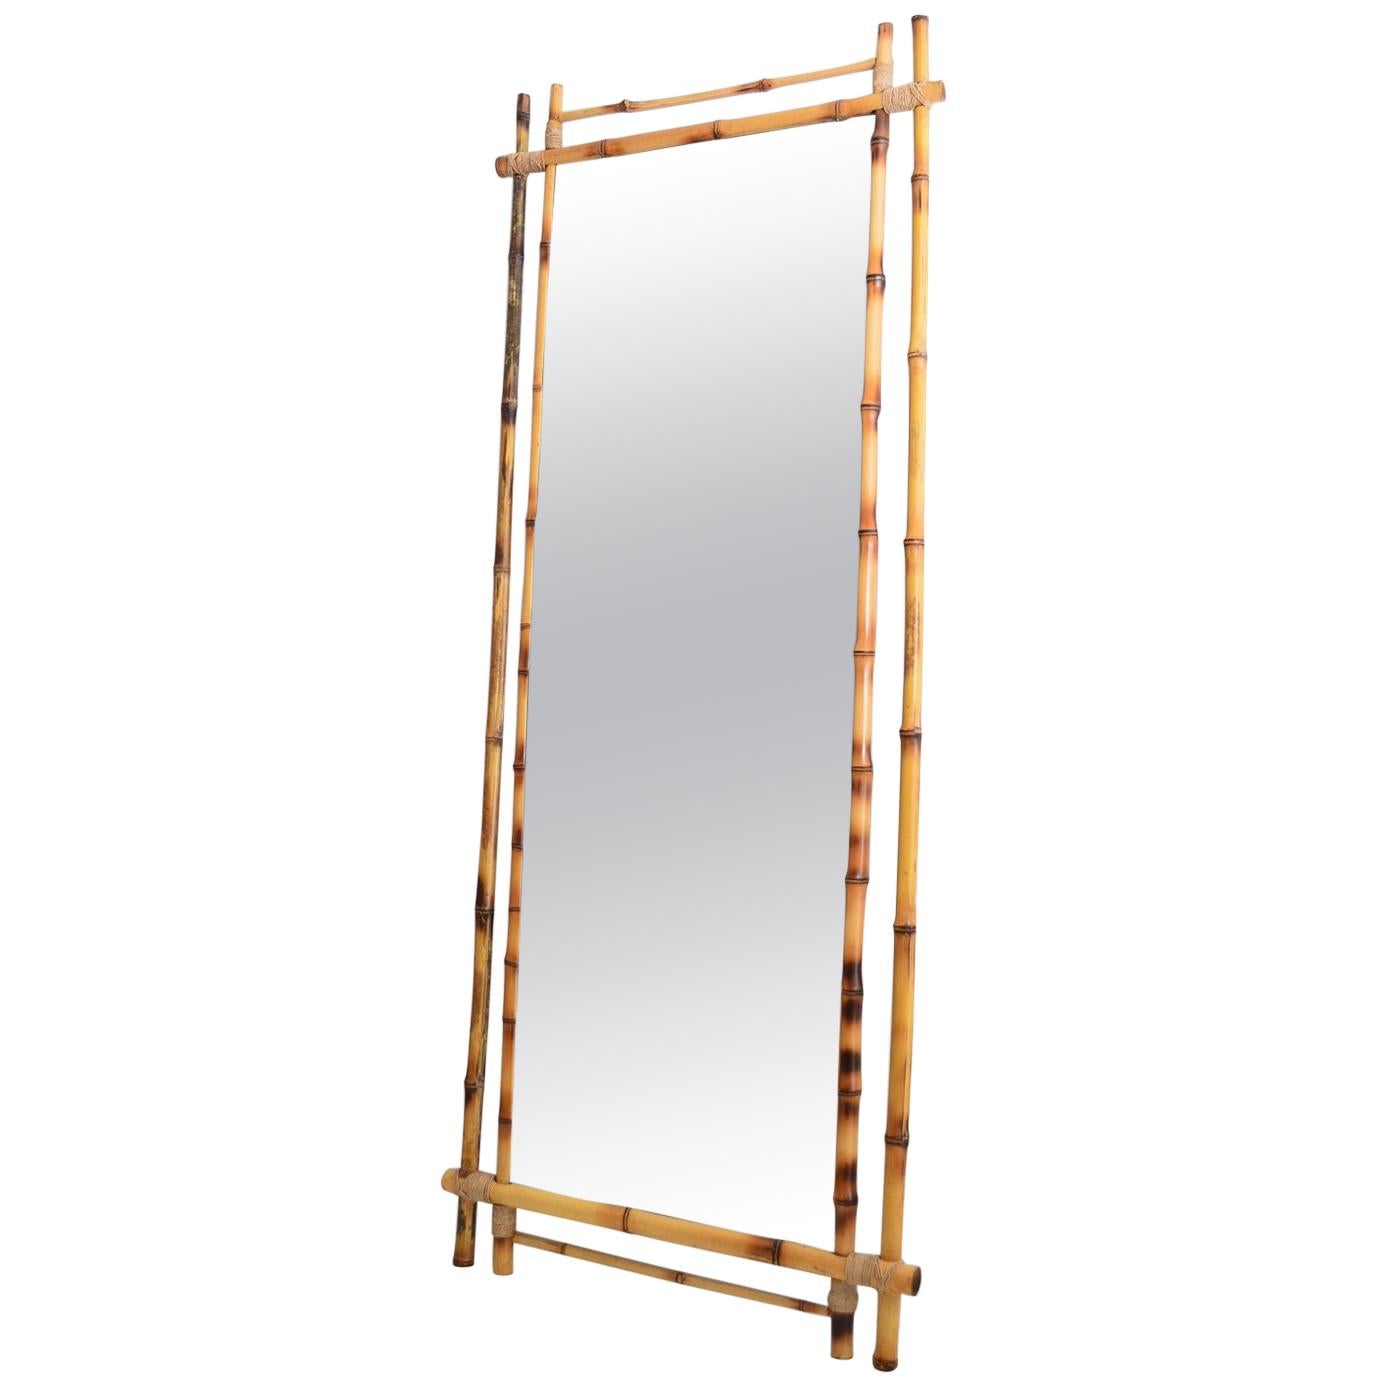 Italian Midcentury Wall Mirror in Real Bamboo Frame, 1960s